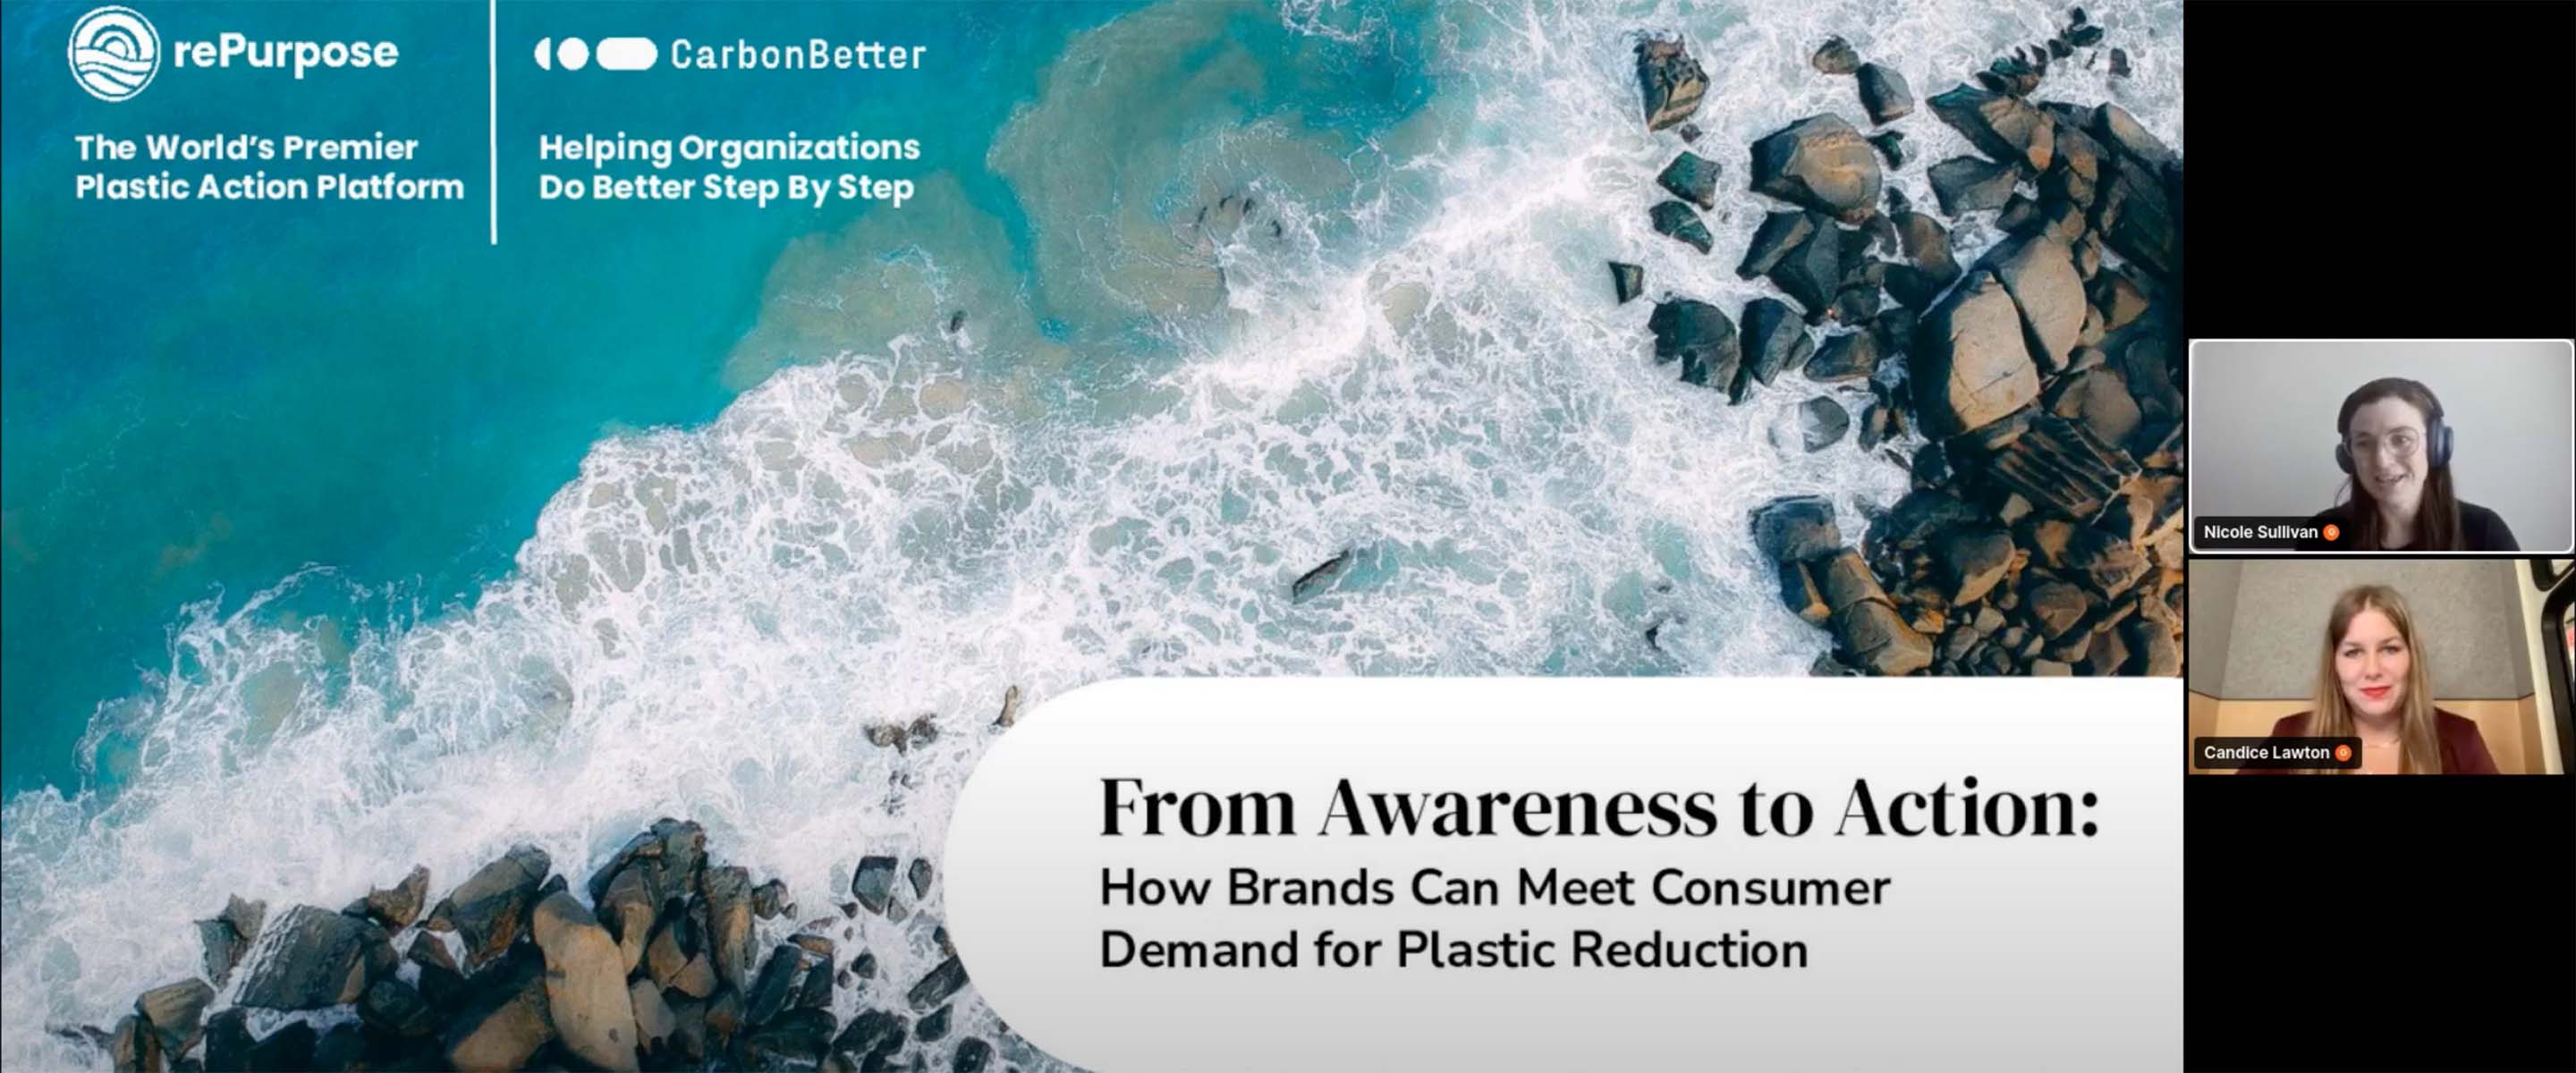 From Awareness to Action: How Brands Can Meet Consumer Demand for Plastic Reduction